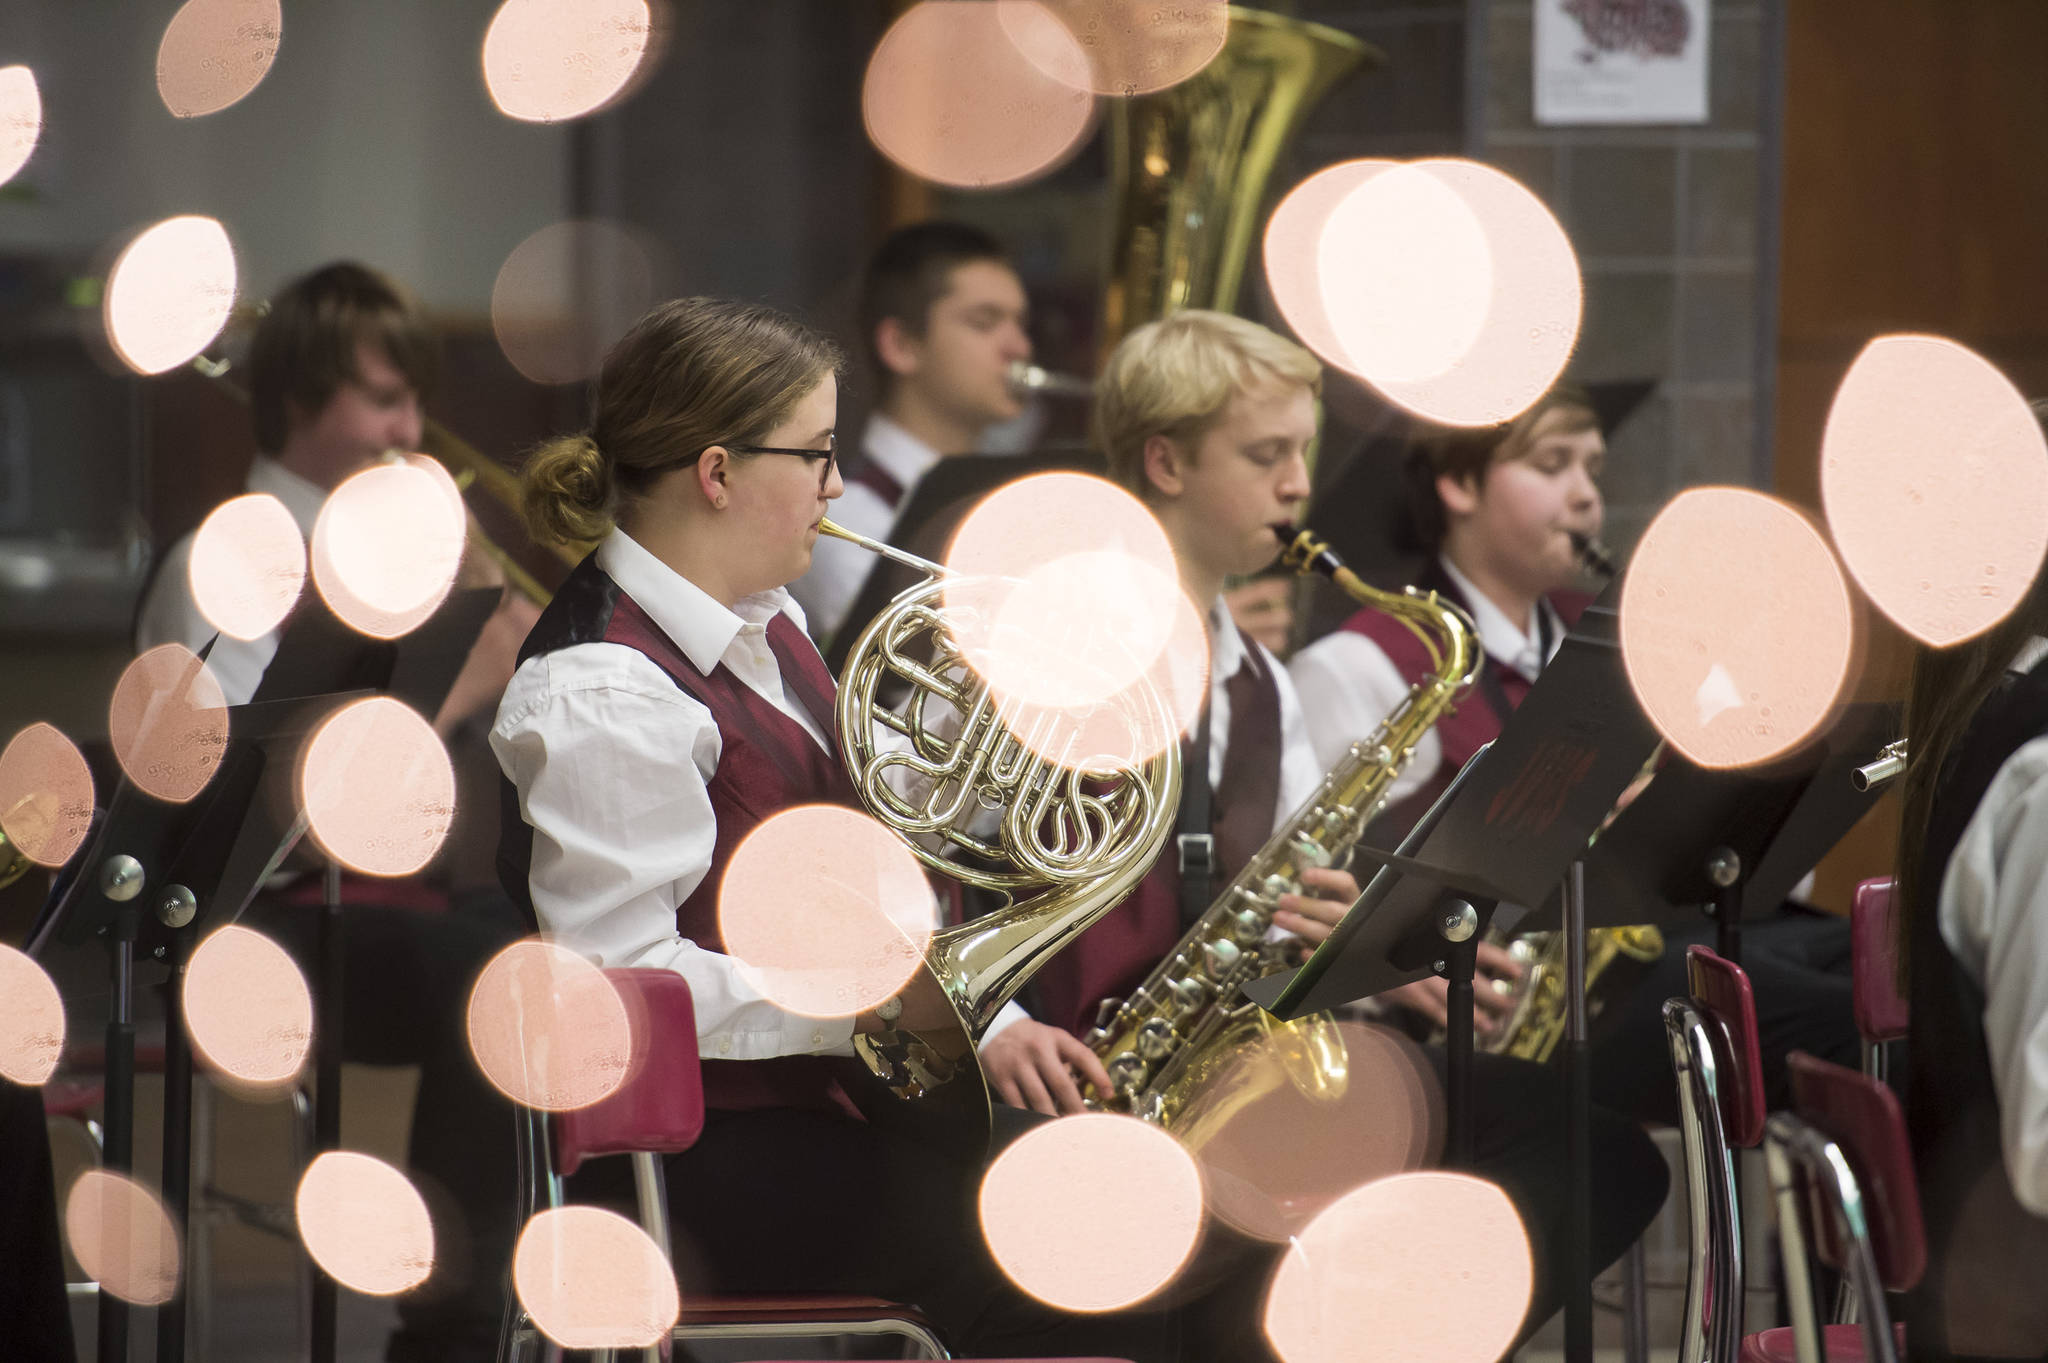 Students with the Juneau-Douglas High School Concert Band play during a holiday music concert at JDHS on Thursday, Dec. 13, 2018. (Michael Penn | Juneau Empire)